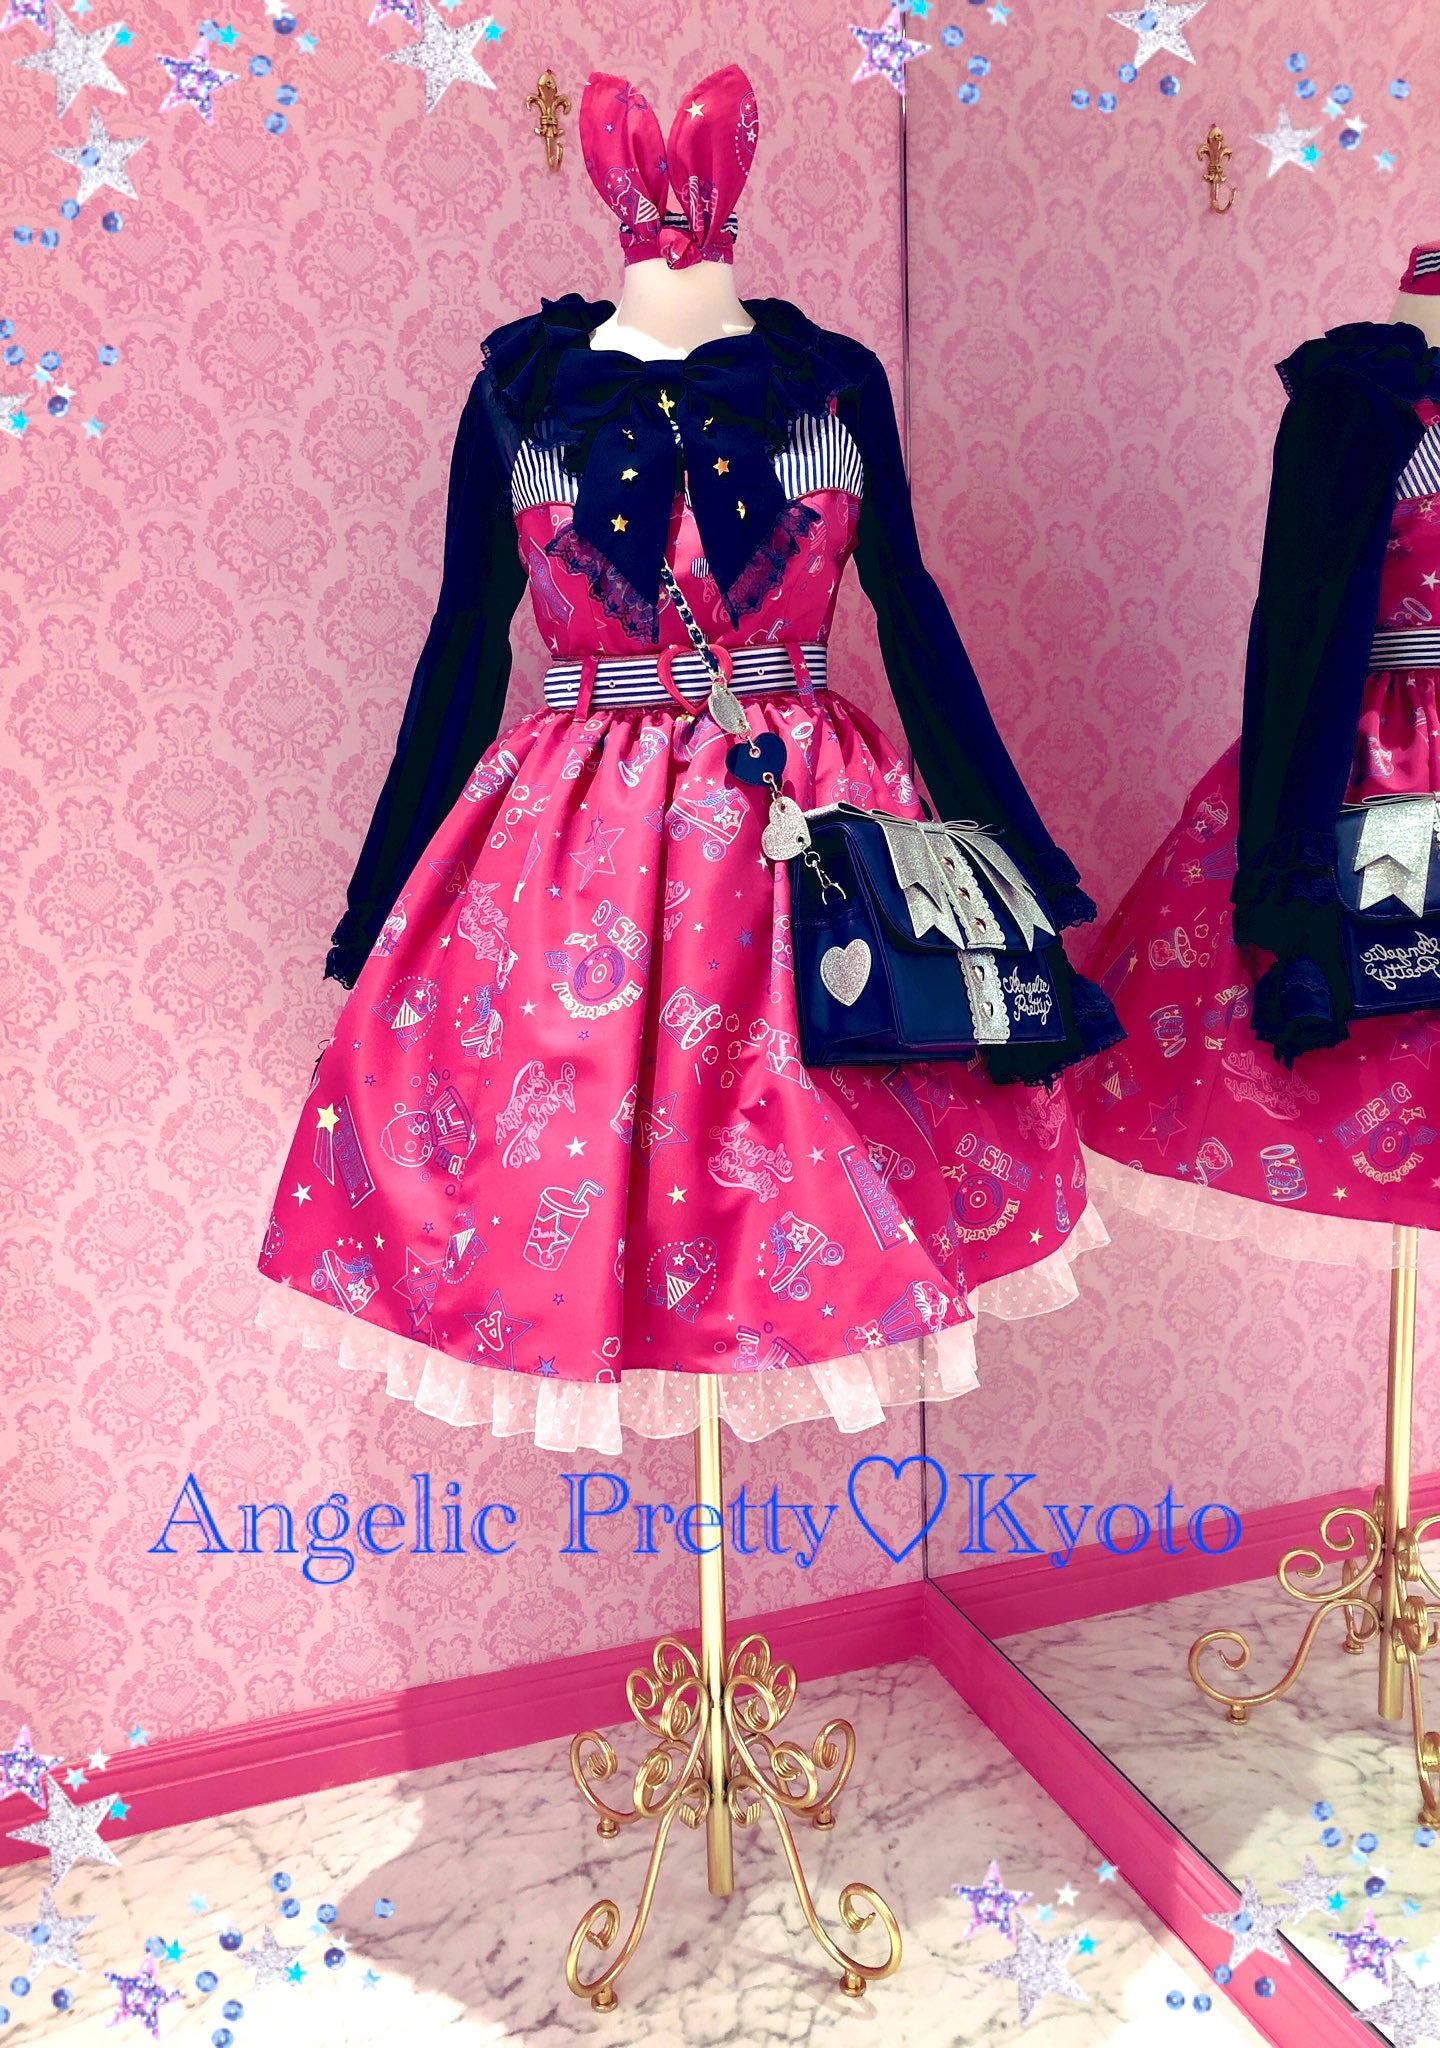 Angelic Pretty Neon Star Diner ワンピース ピンク | myglobaltax.com